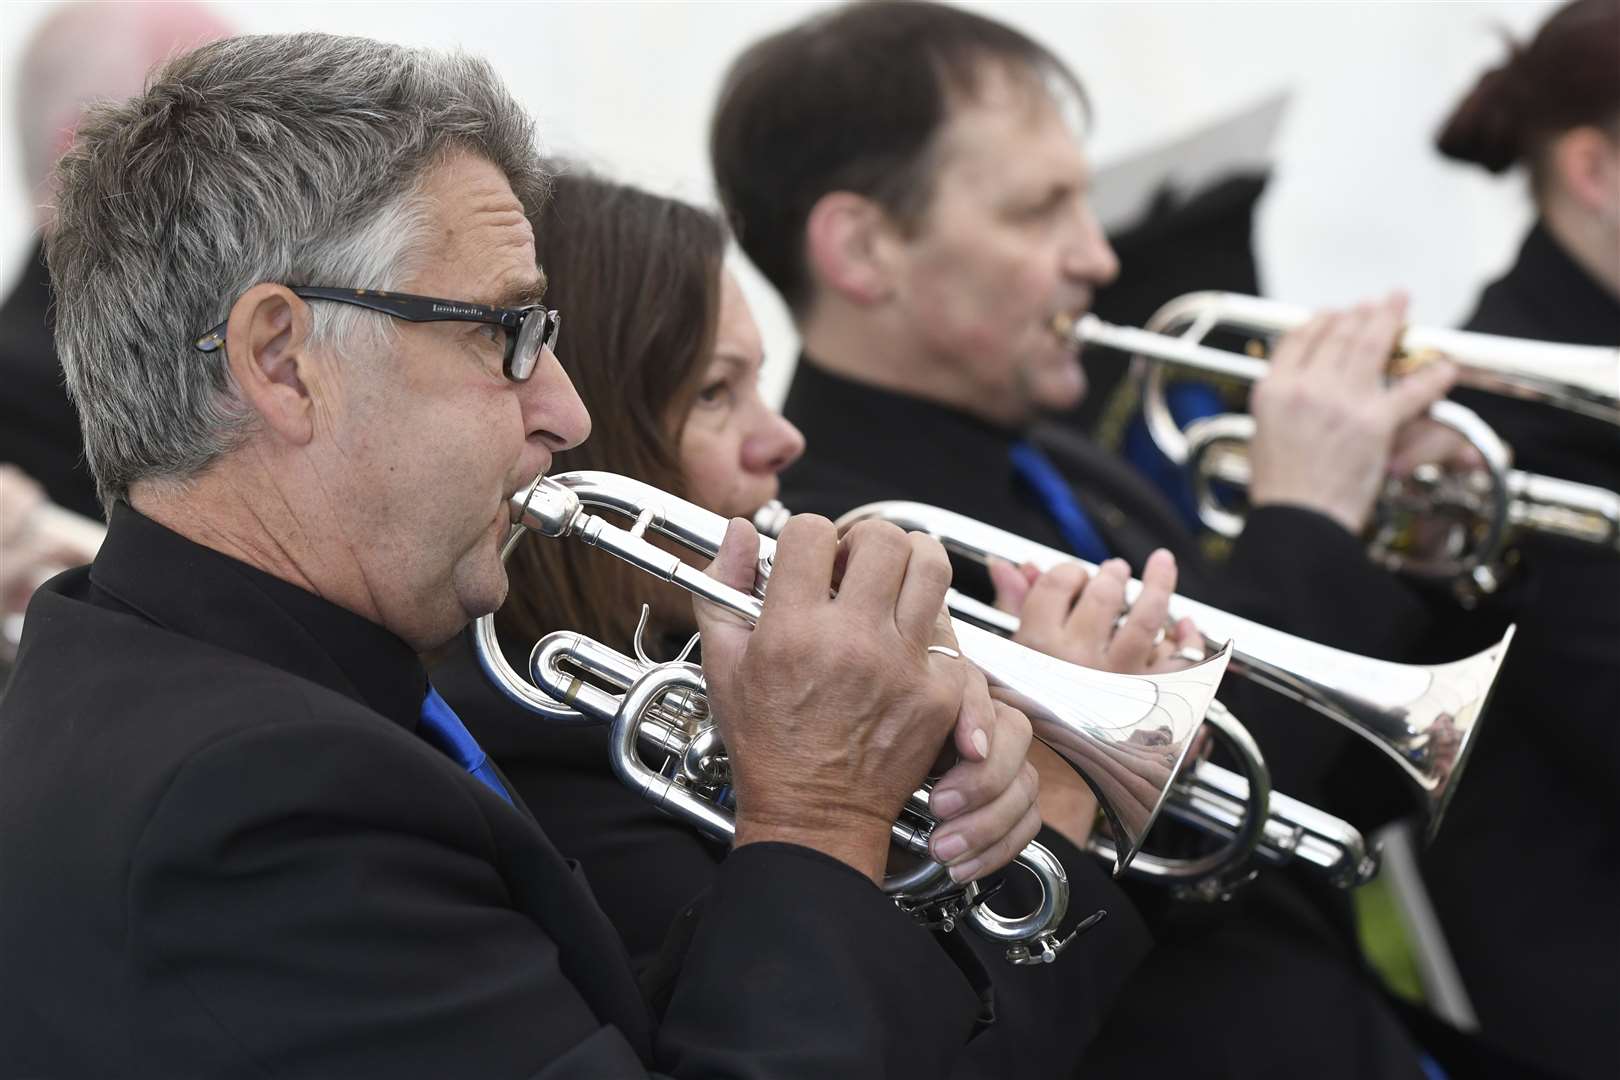 Snowdon Colliery Band will perform at this year's Kent Miners' Festival